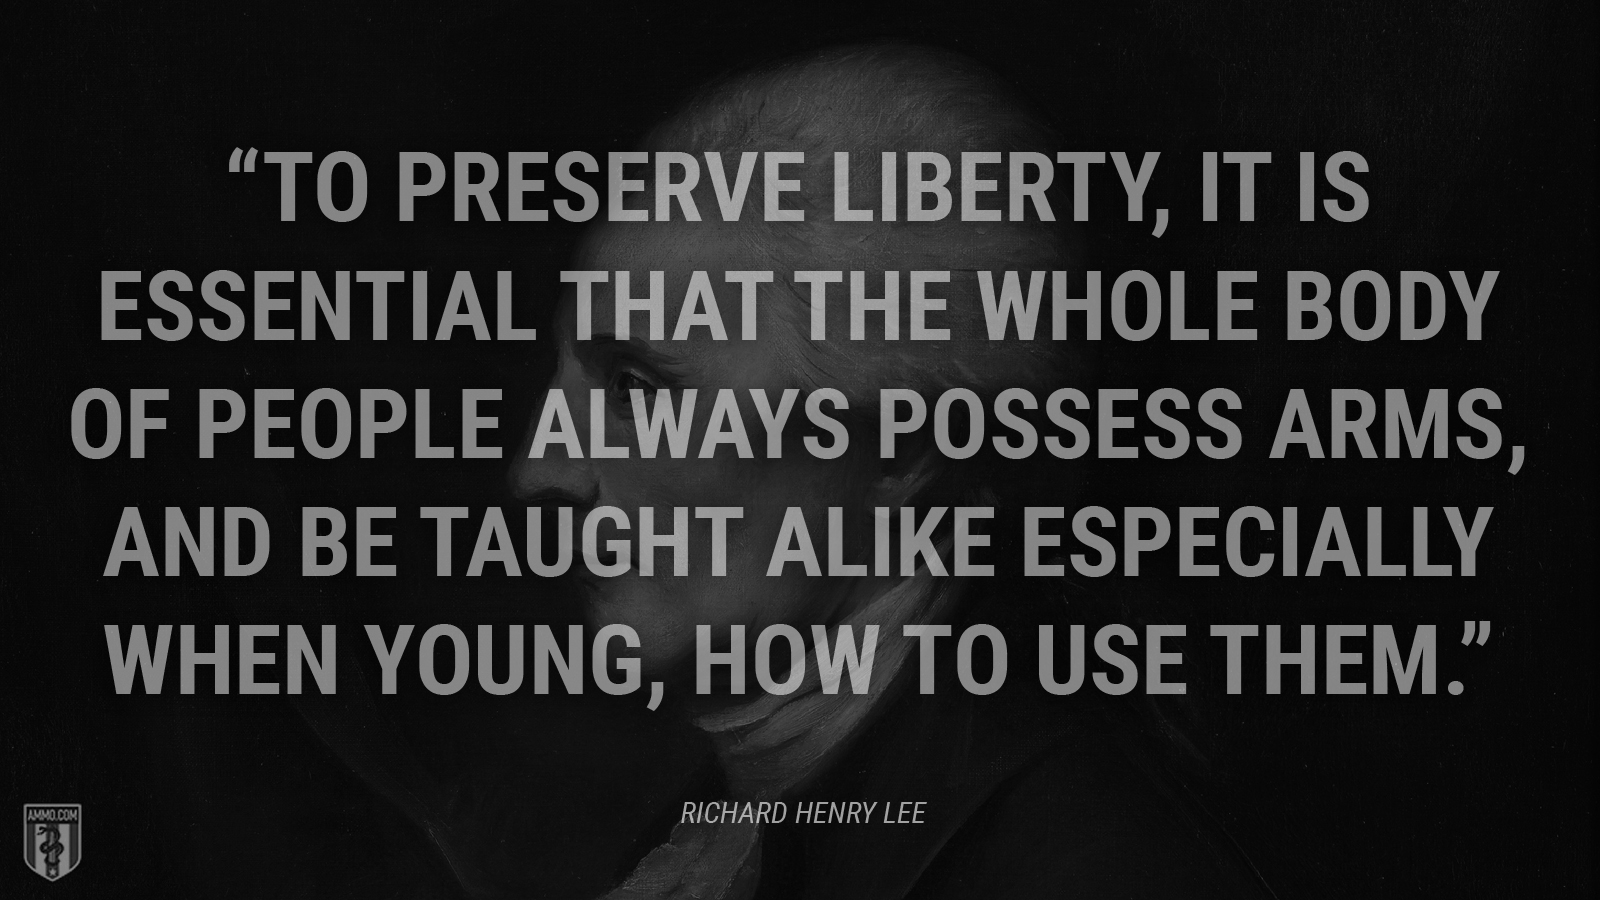 “To preserve liberty, it is essential that the whole body of people always possess arms, and be taught alike especially when young, how to use them.” - Richard Henry Lee